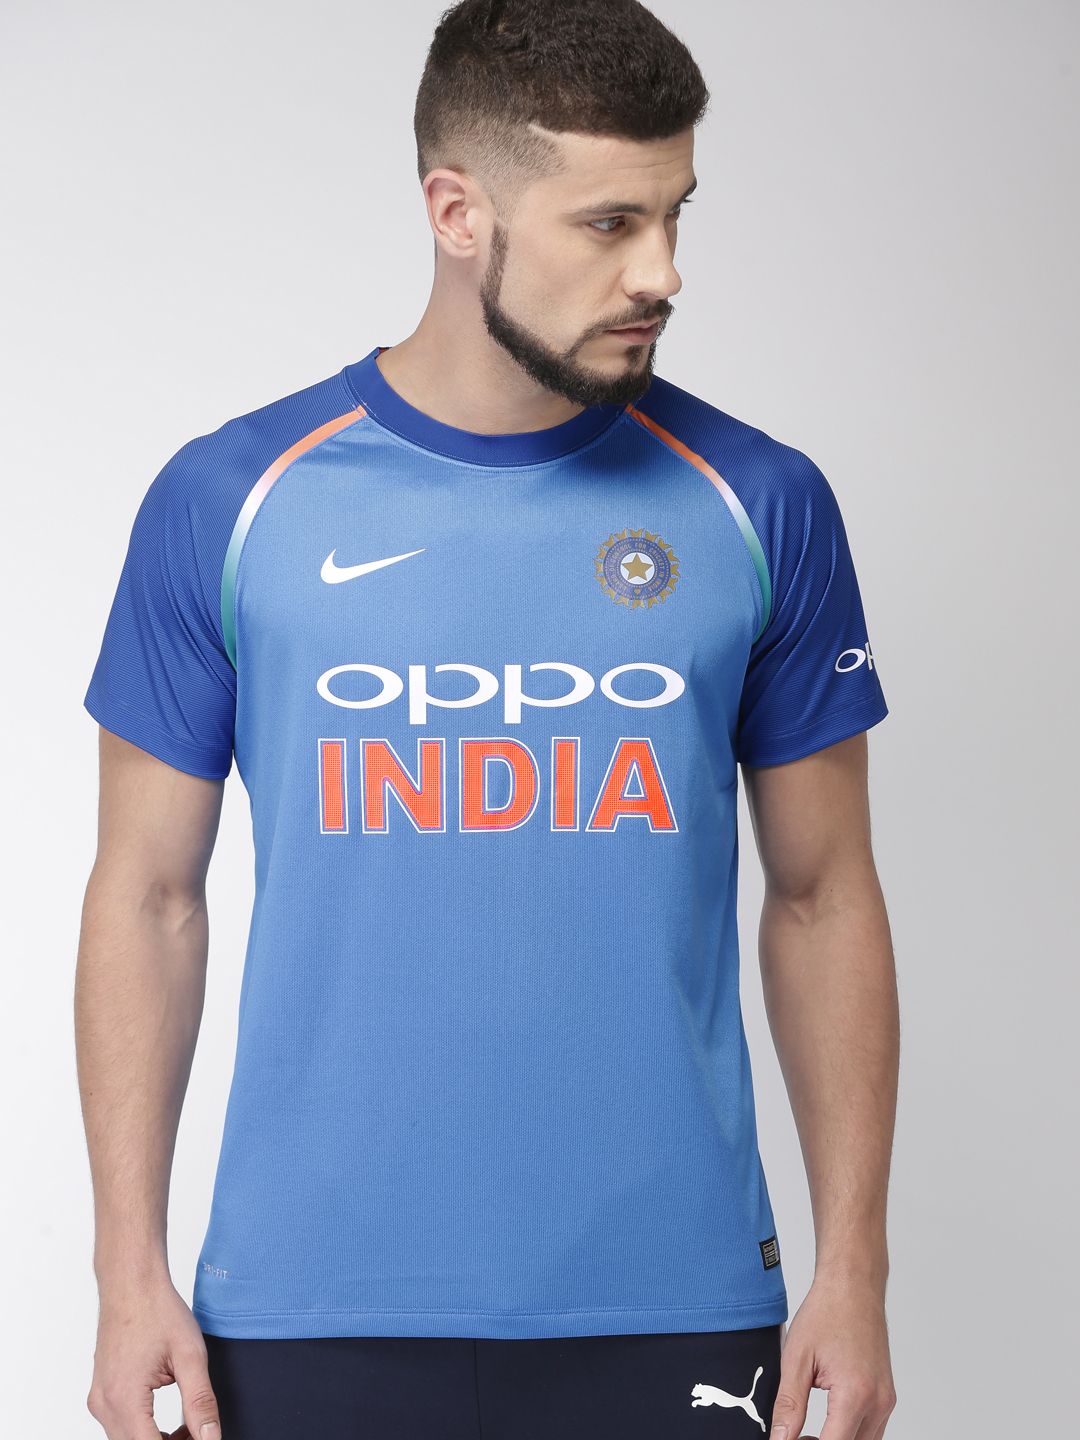 buying indian cricket jersey